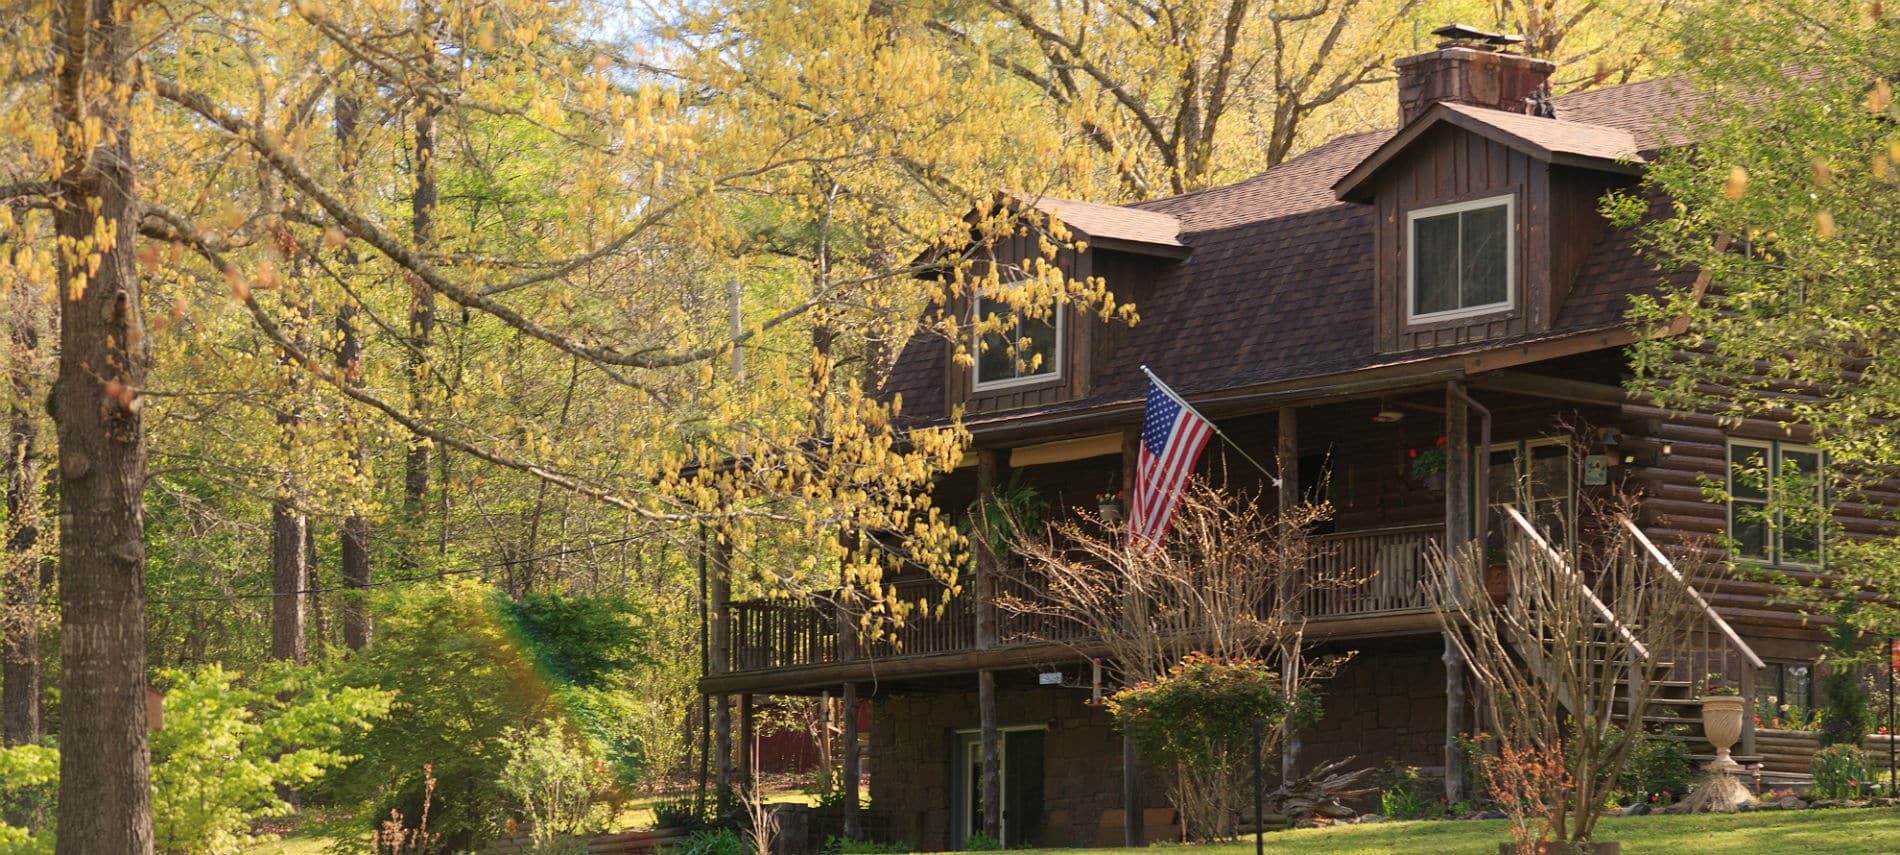 Exterior of the inn with a large front porch, log siding and an American flag hanging from the front post.